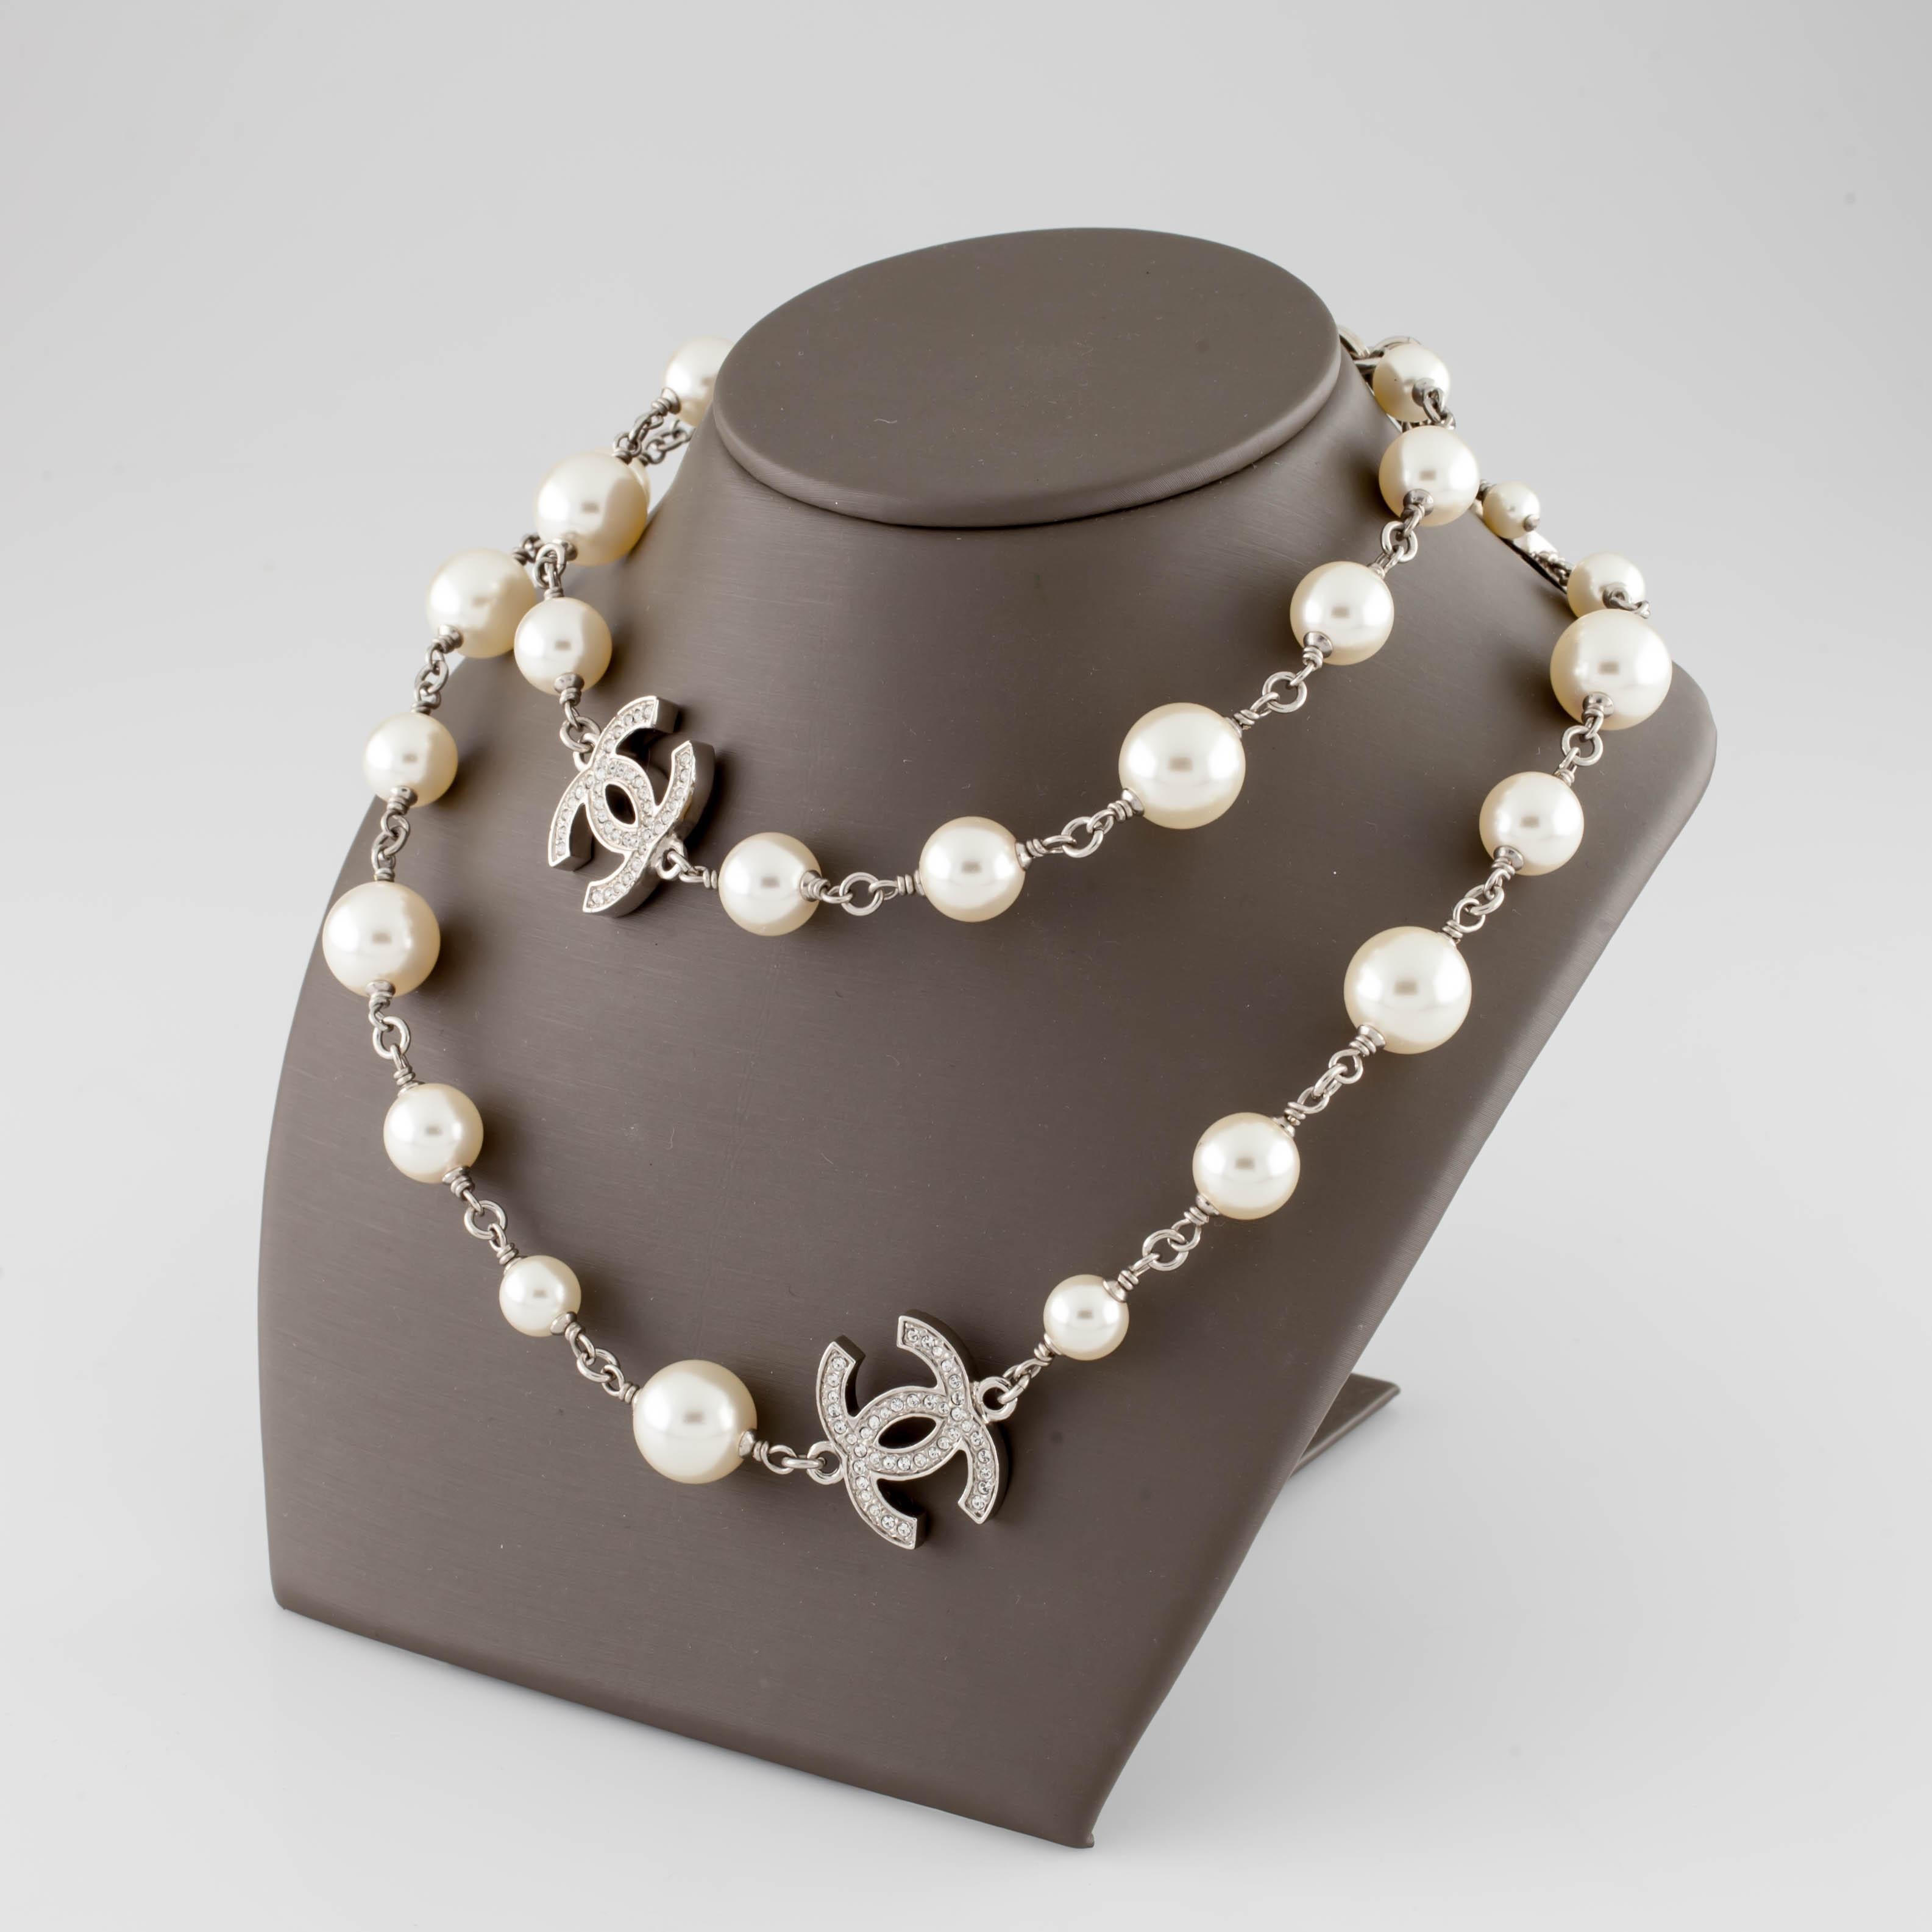 Gorgeous Glass Pearl Necklace by Chanel
Features 5 